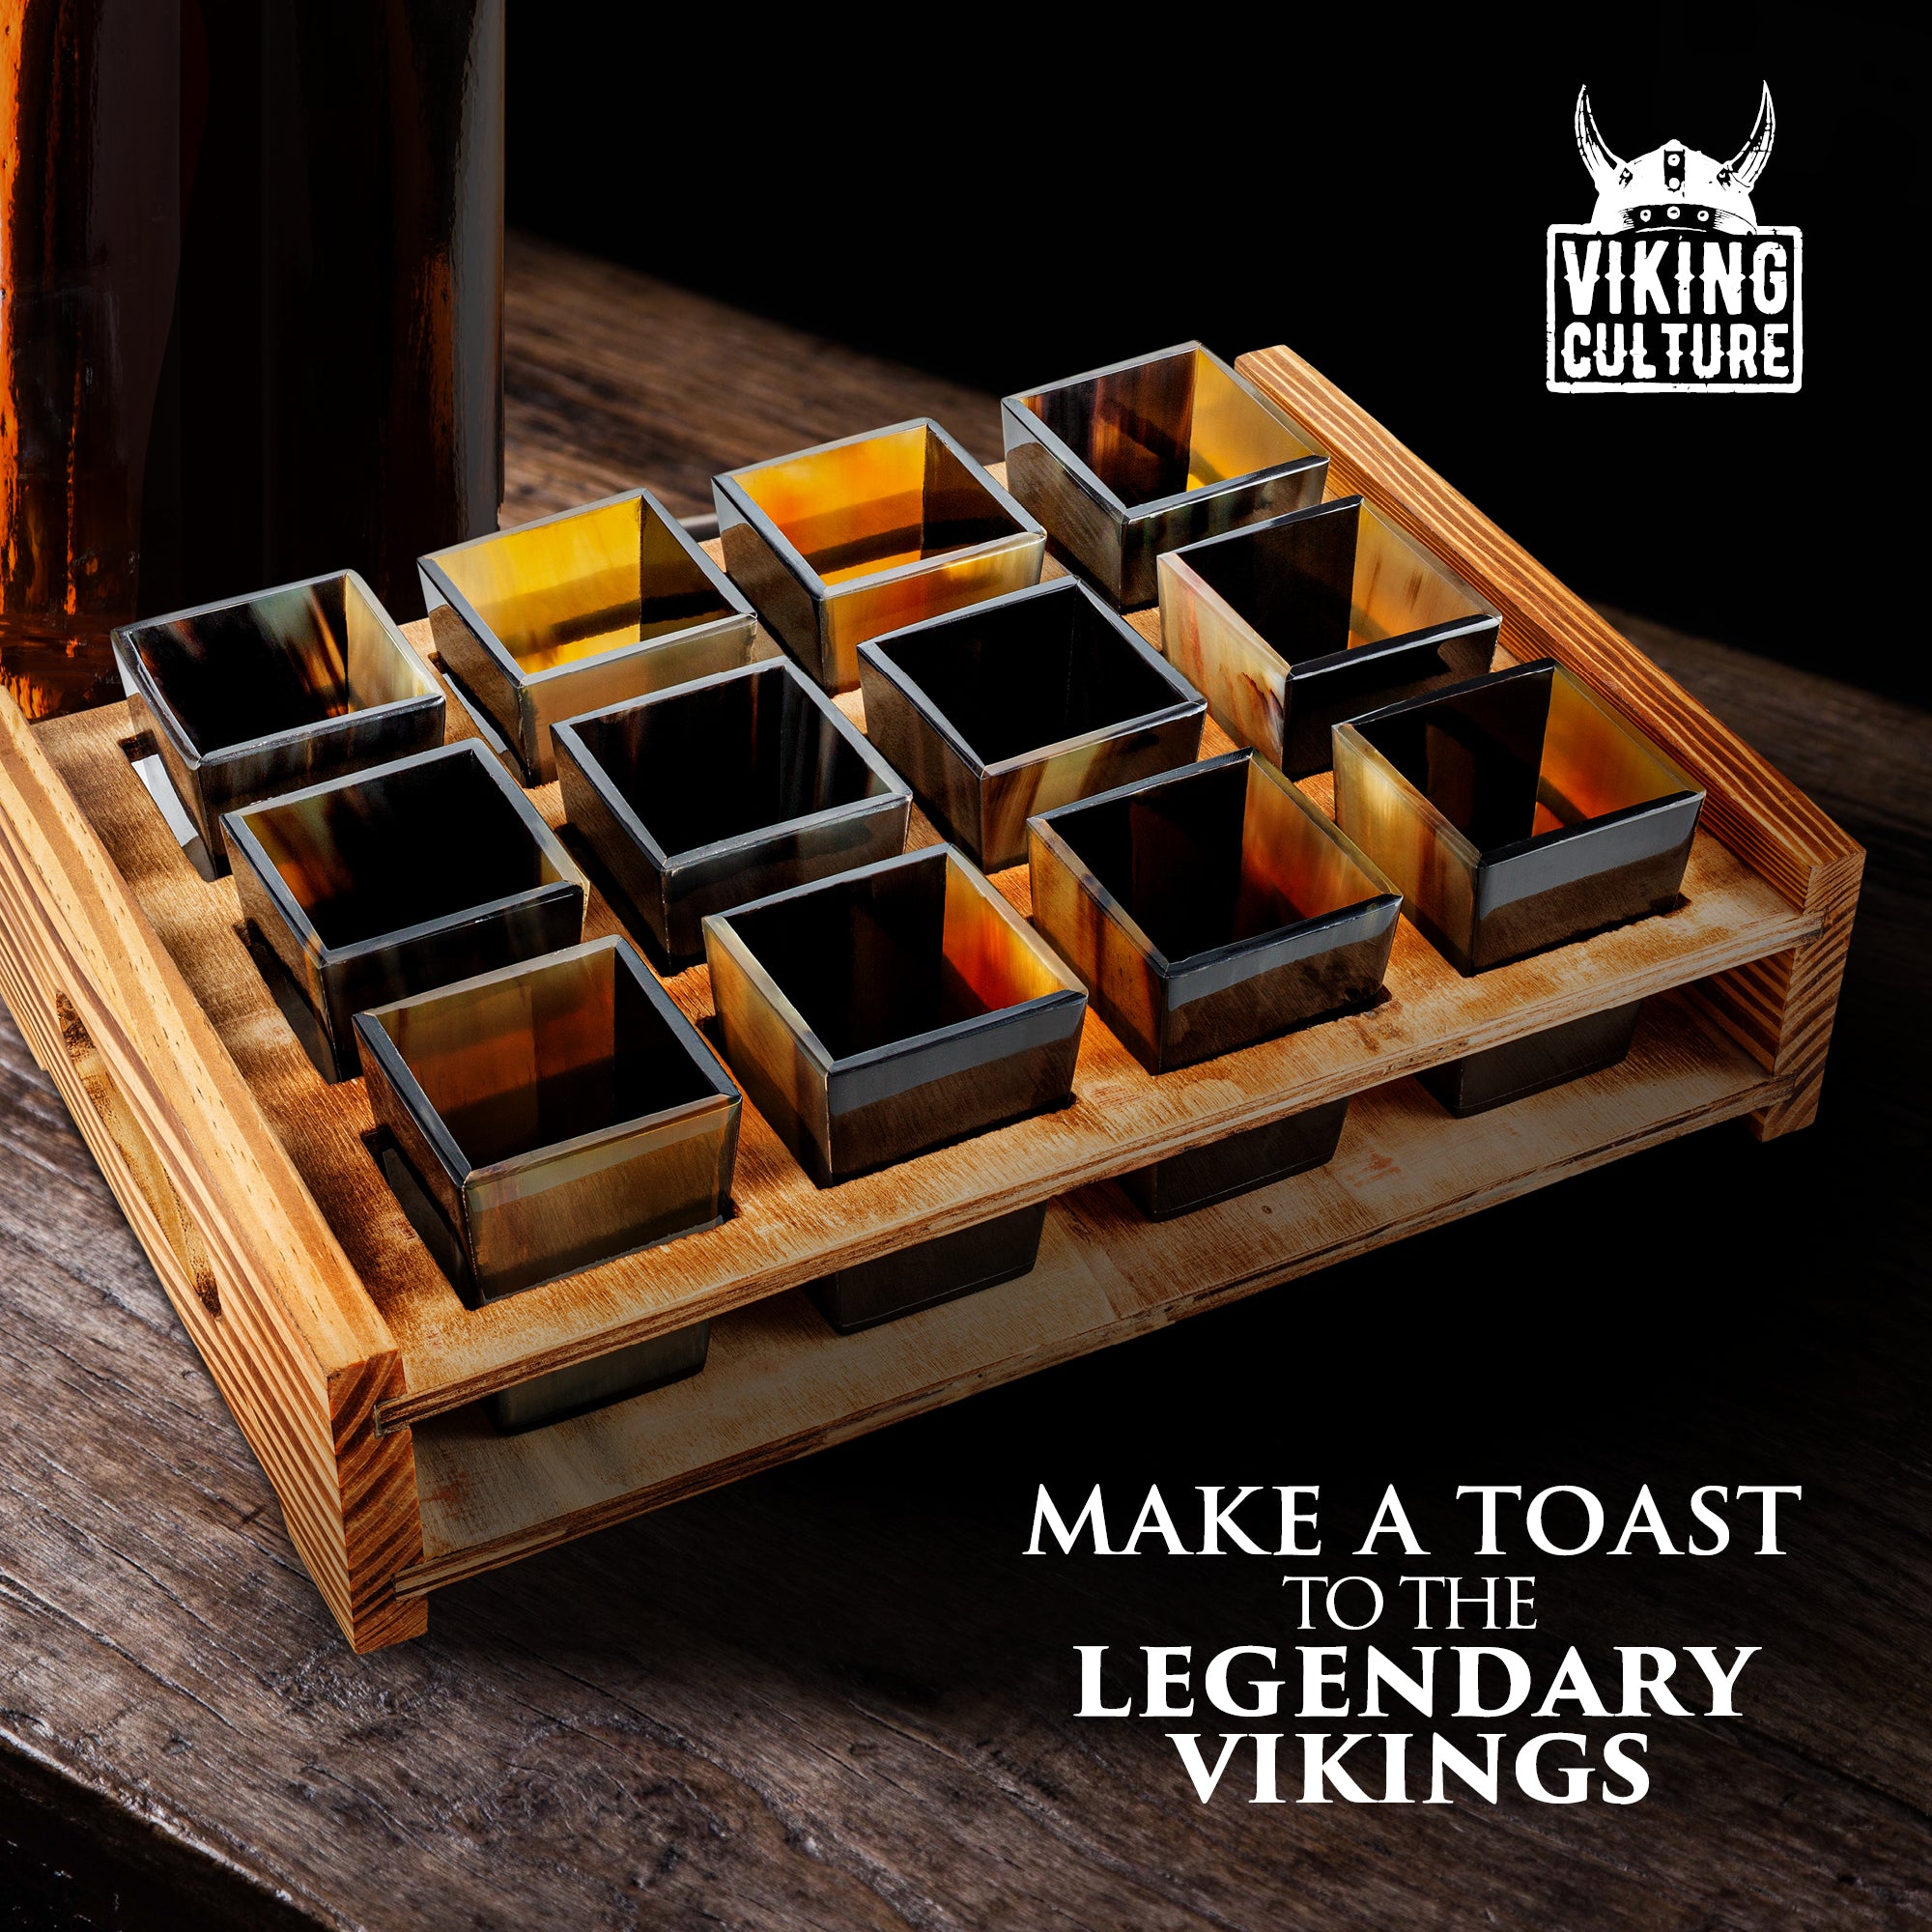 Viking Culture Horn Shot Glasses - Authentic Medieval and Nordic-Inspired Drinkware with Wooden Serving and Storage Tray - Handmade Drinking Set - Perfect for Parties, Collection and Gift - 12-Pack